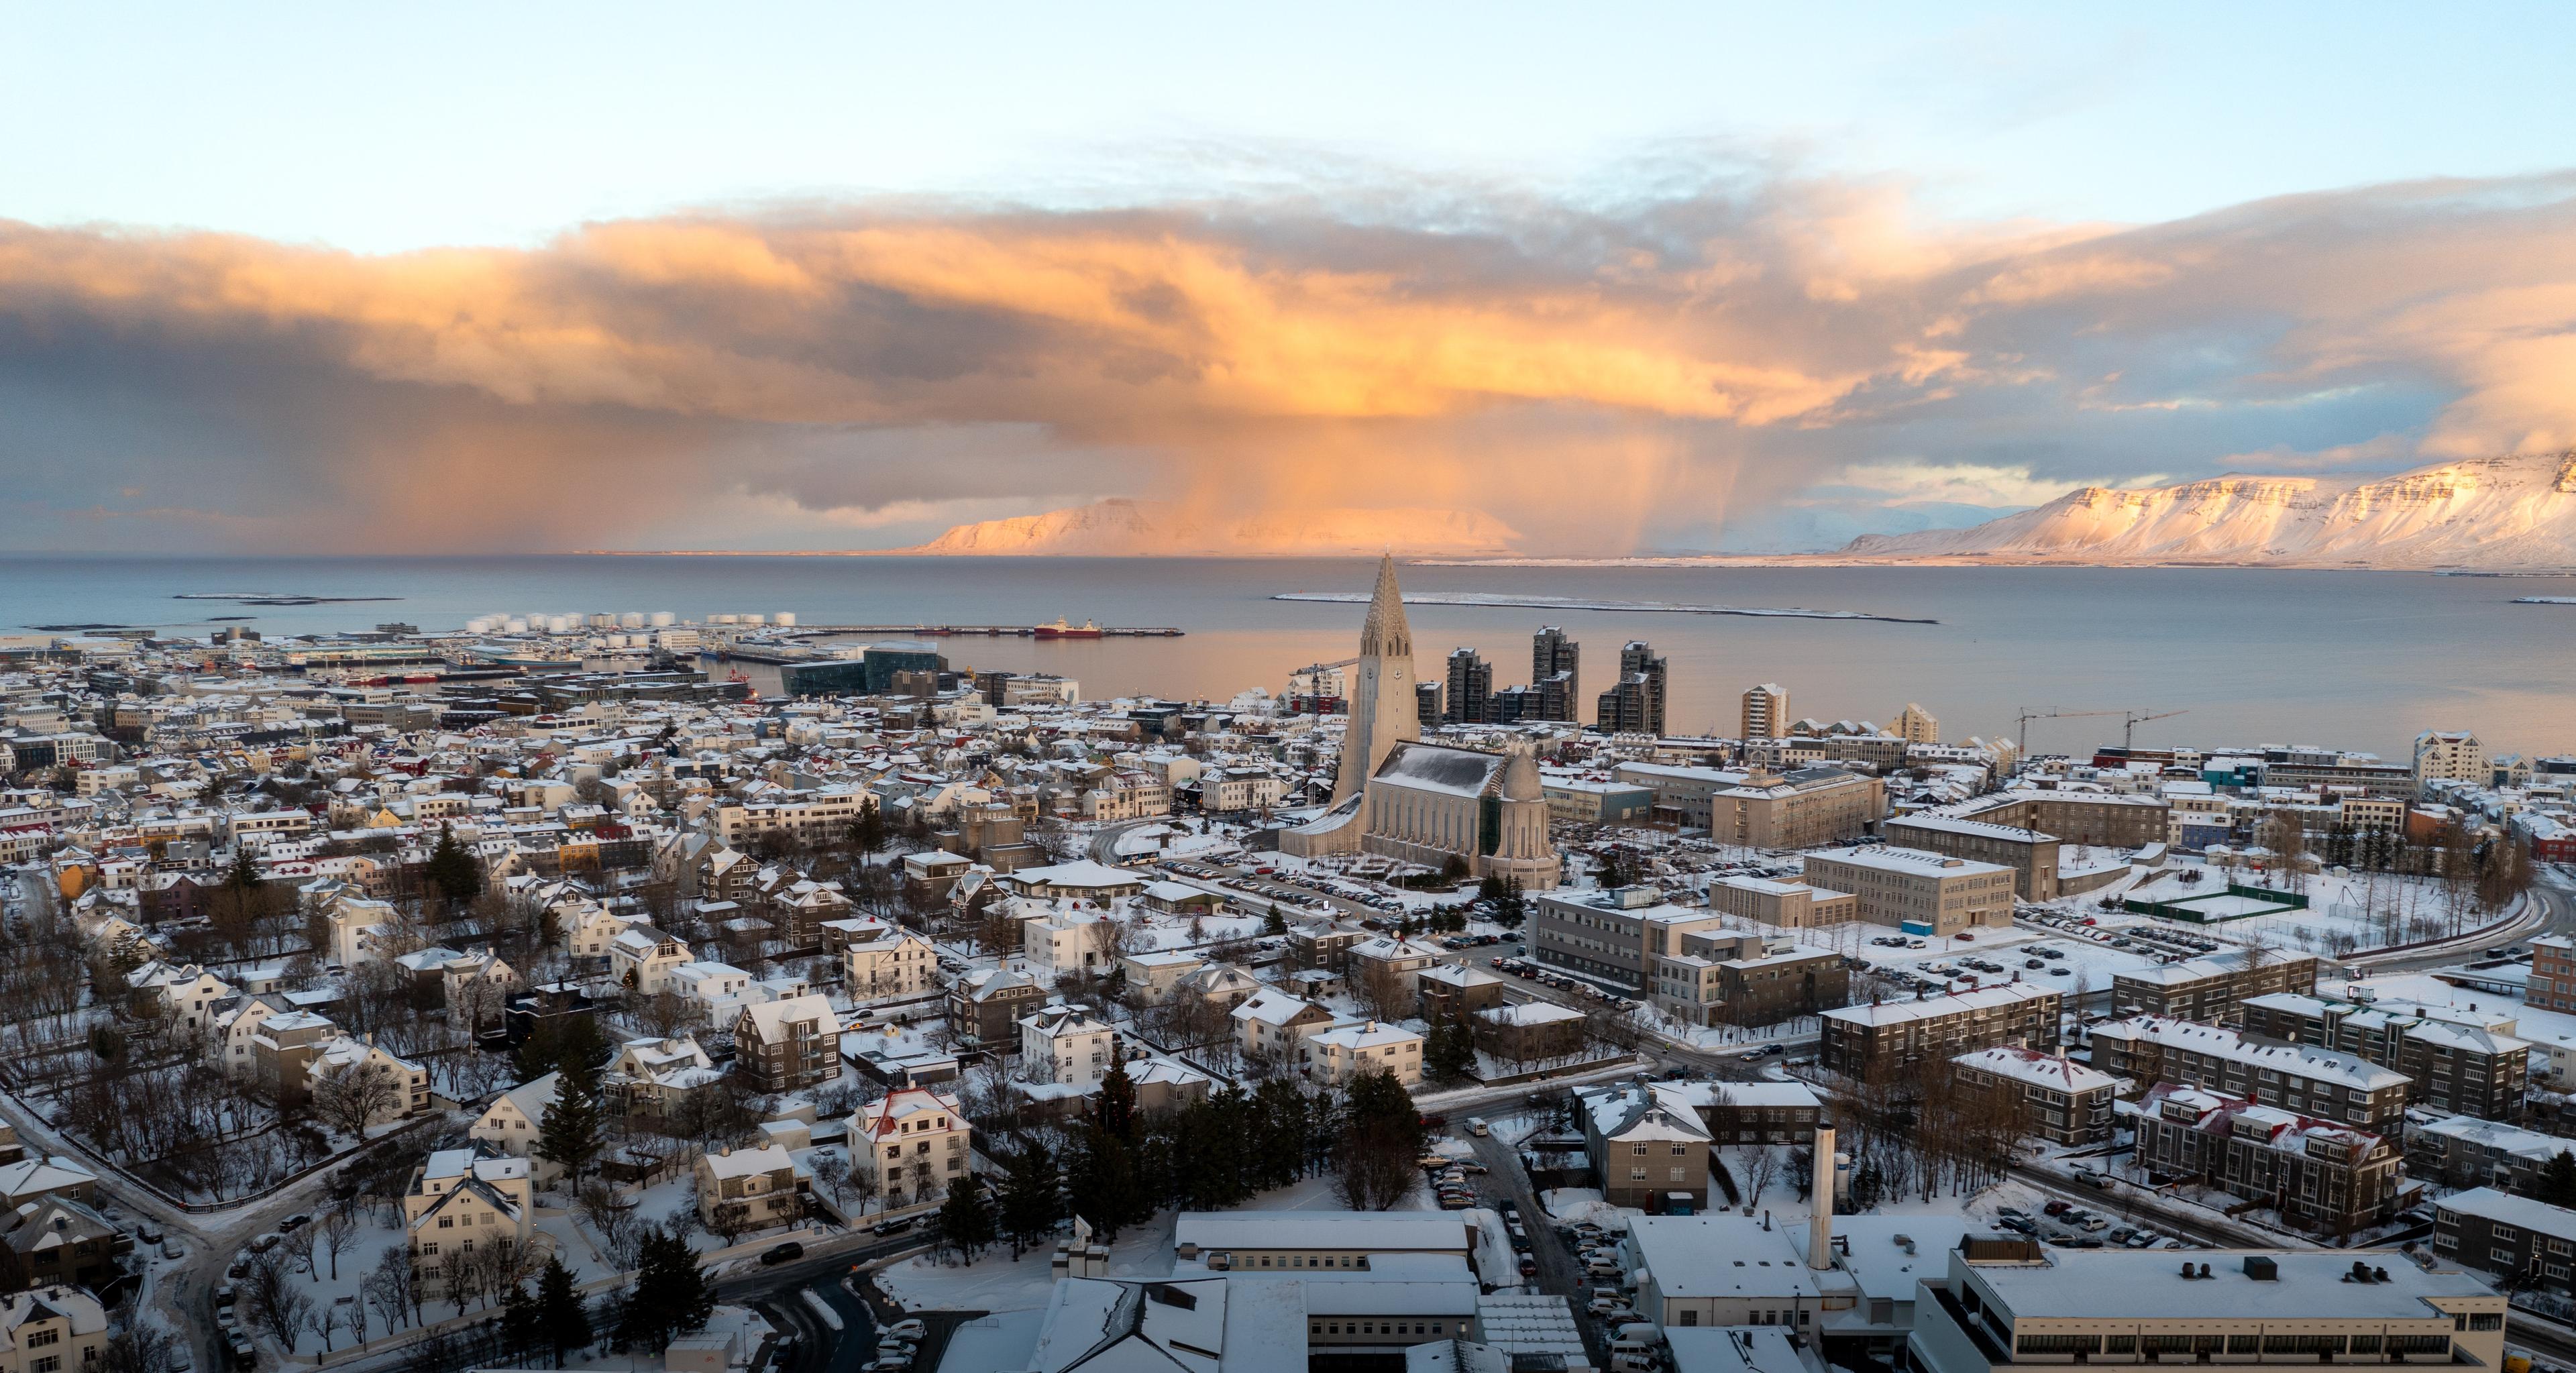 Aerial perspective of Reykjavík city blanketed in pristine white snow, showcasing its urban layout amidst a wintry landscape.